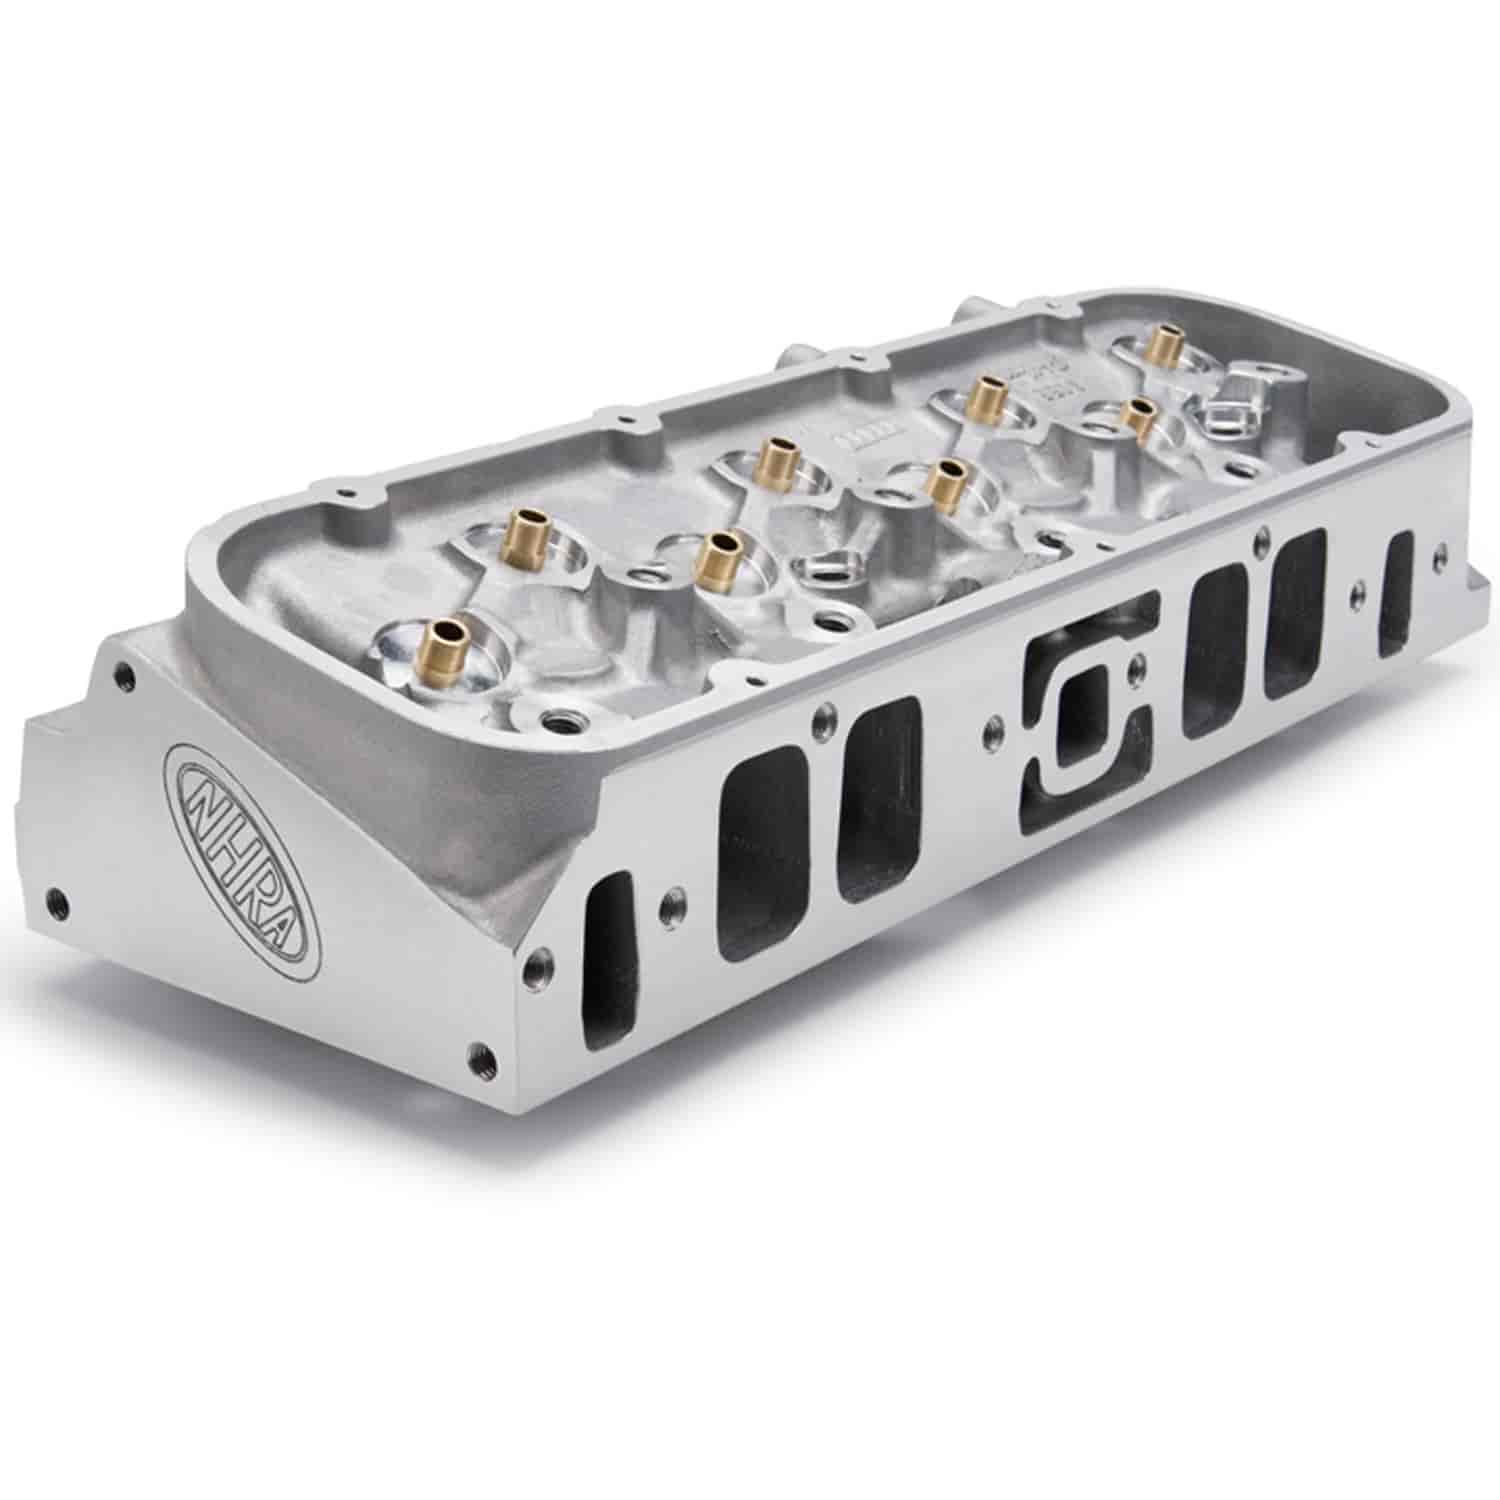 NHRA Performer RPM454-R Rectangle Port Aluminum Cylinder Head for Big Block Chevy